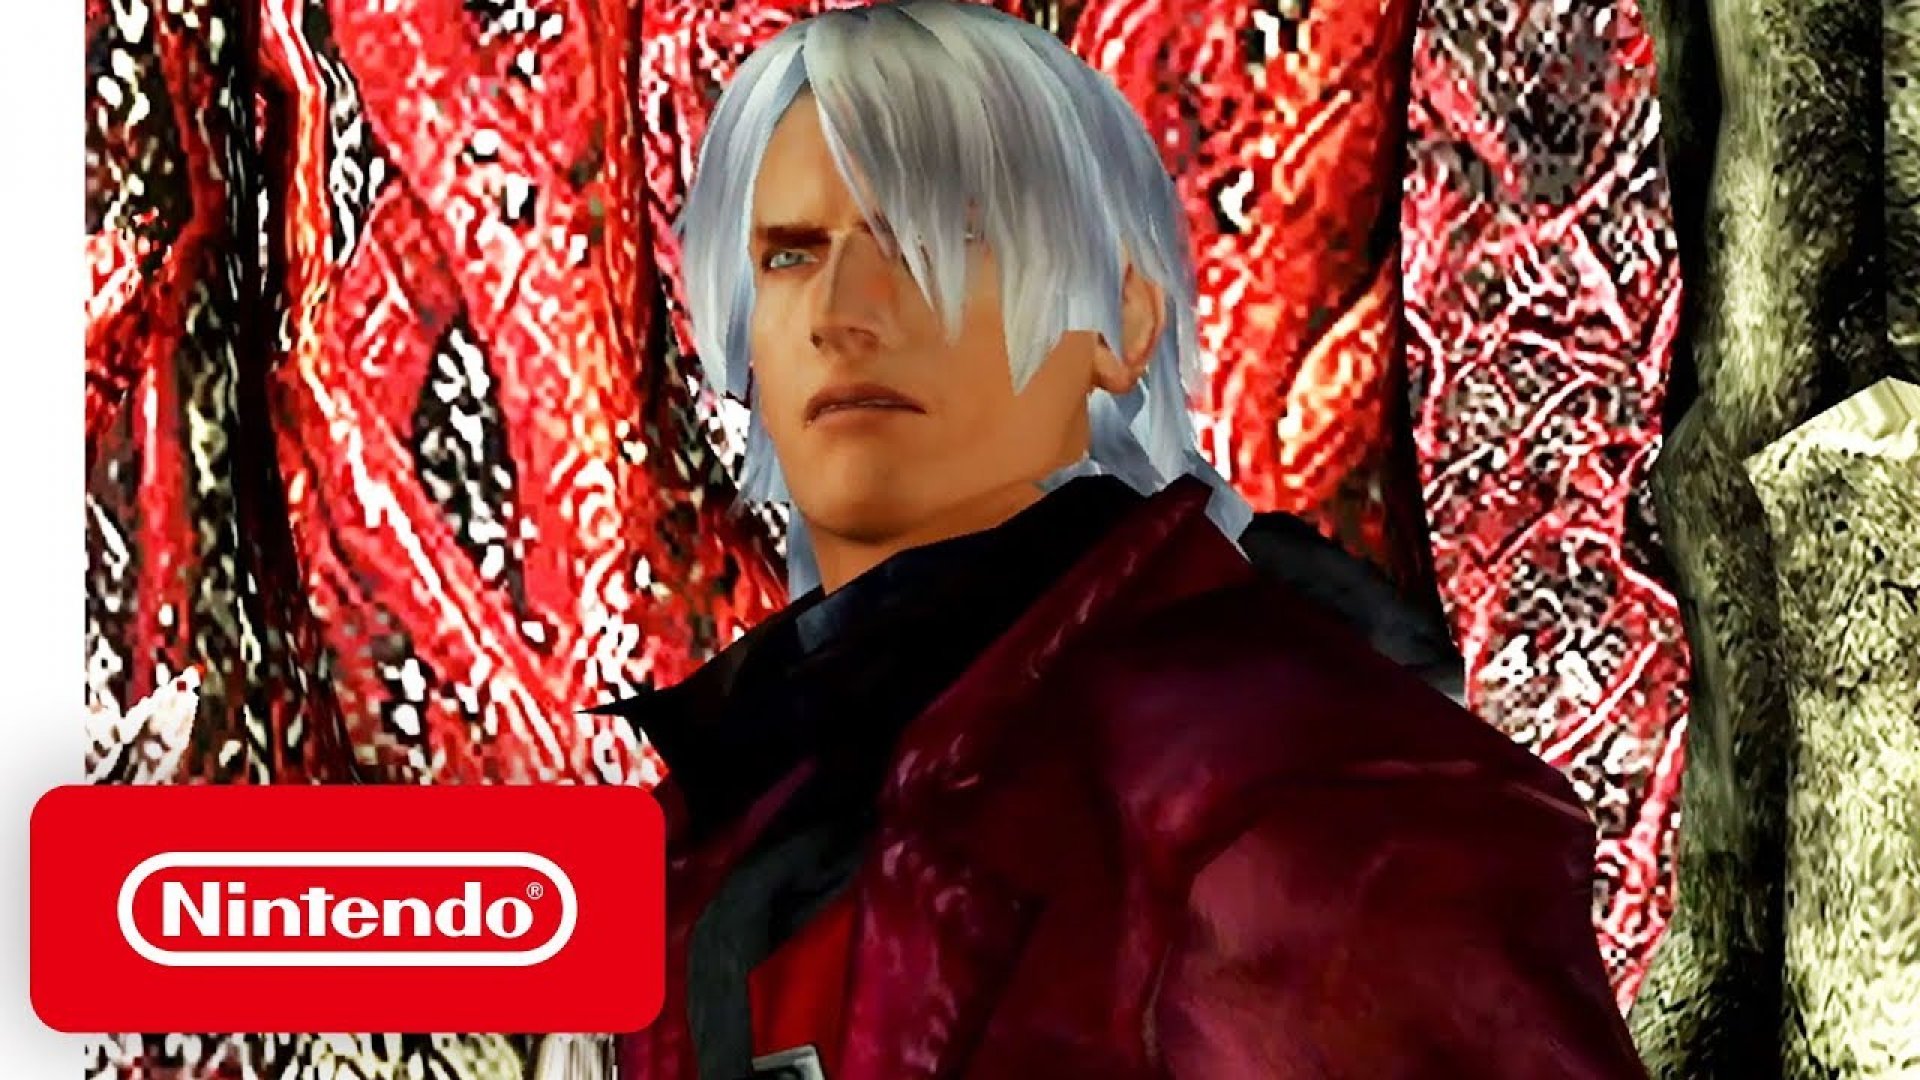 DMC 5 Nintendo Switch. Devil May Cry 1. Devil May Cry свитч. Devil May Cry Nintendo Switch. Dmc дата